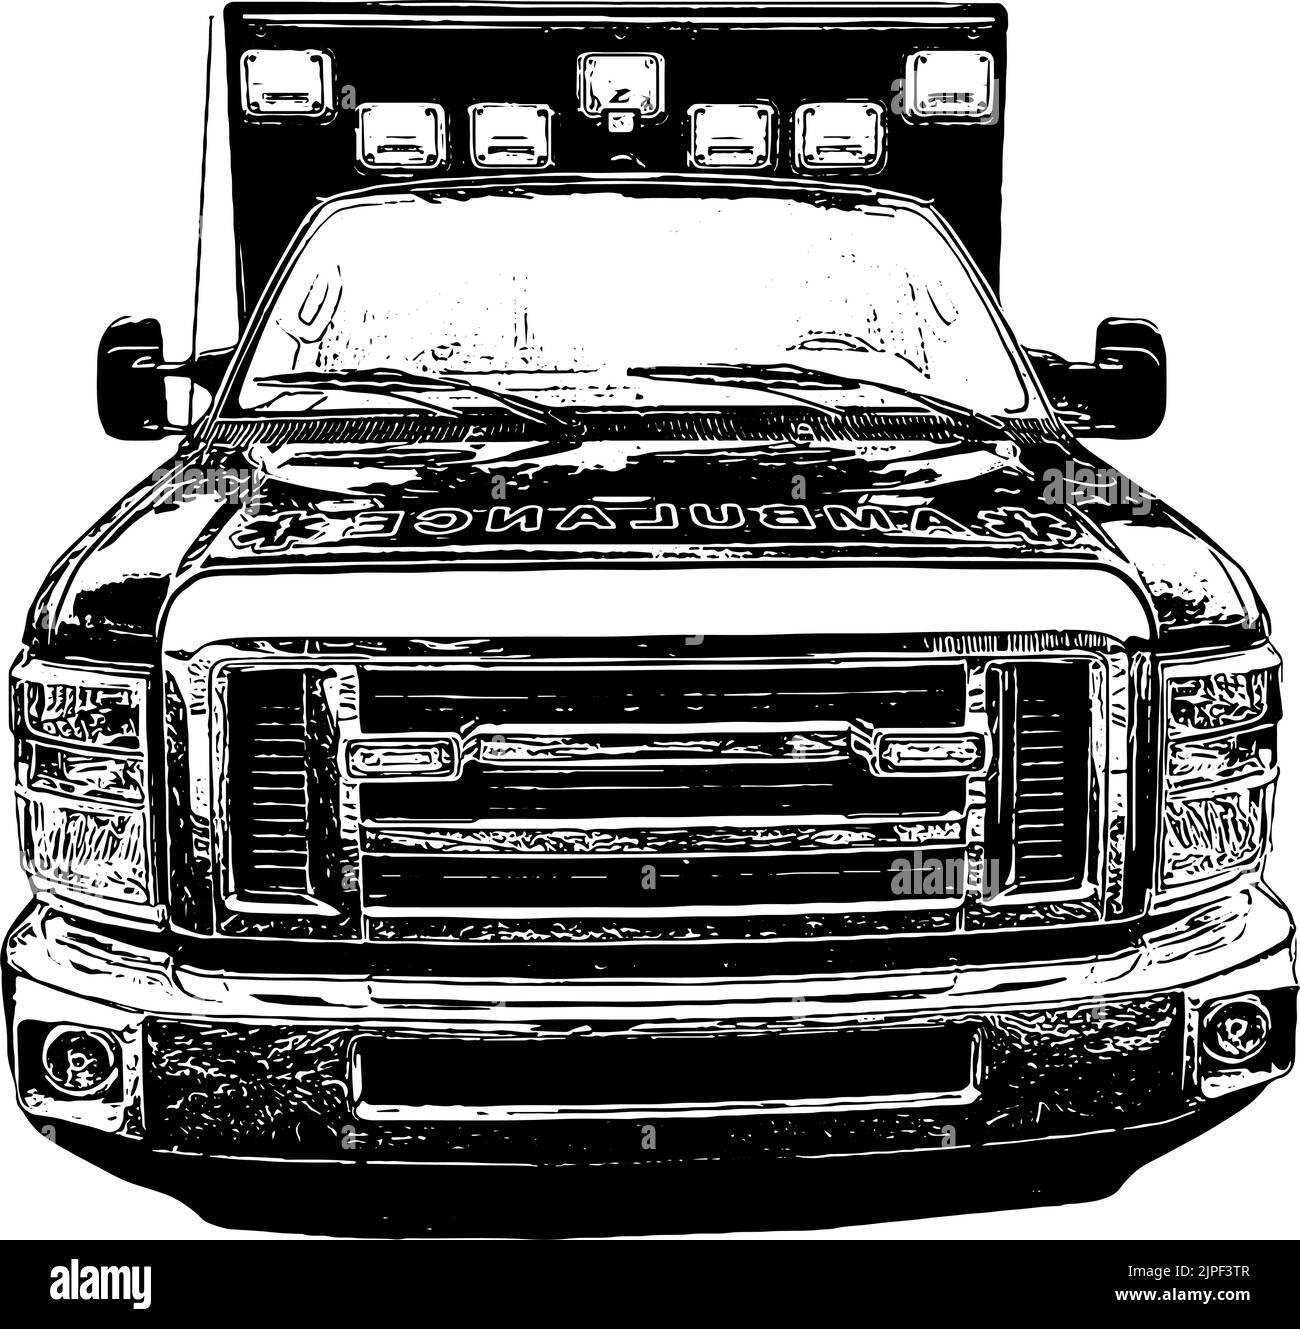 Ambulance from the front vector illustration in black on white background Stock Vector